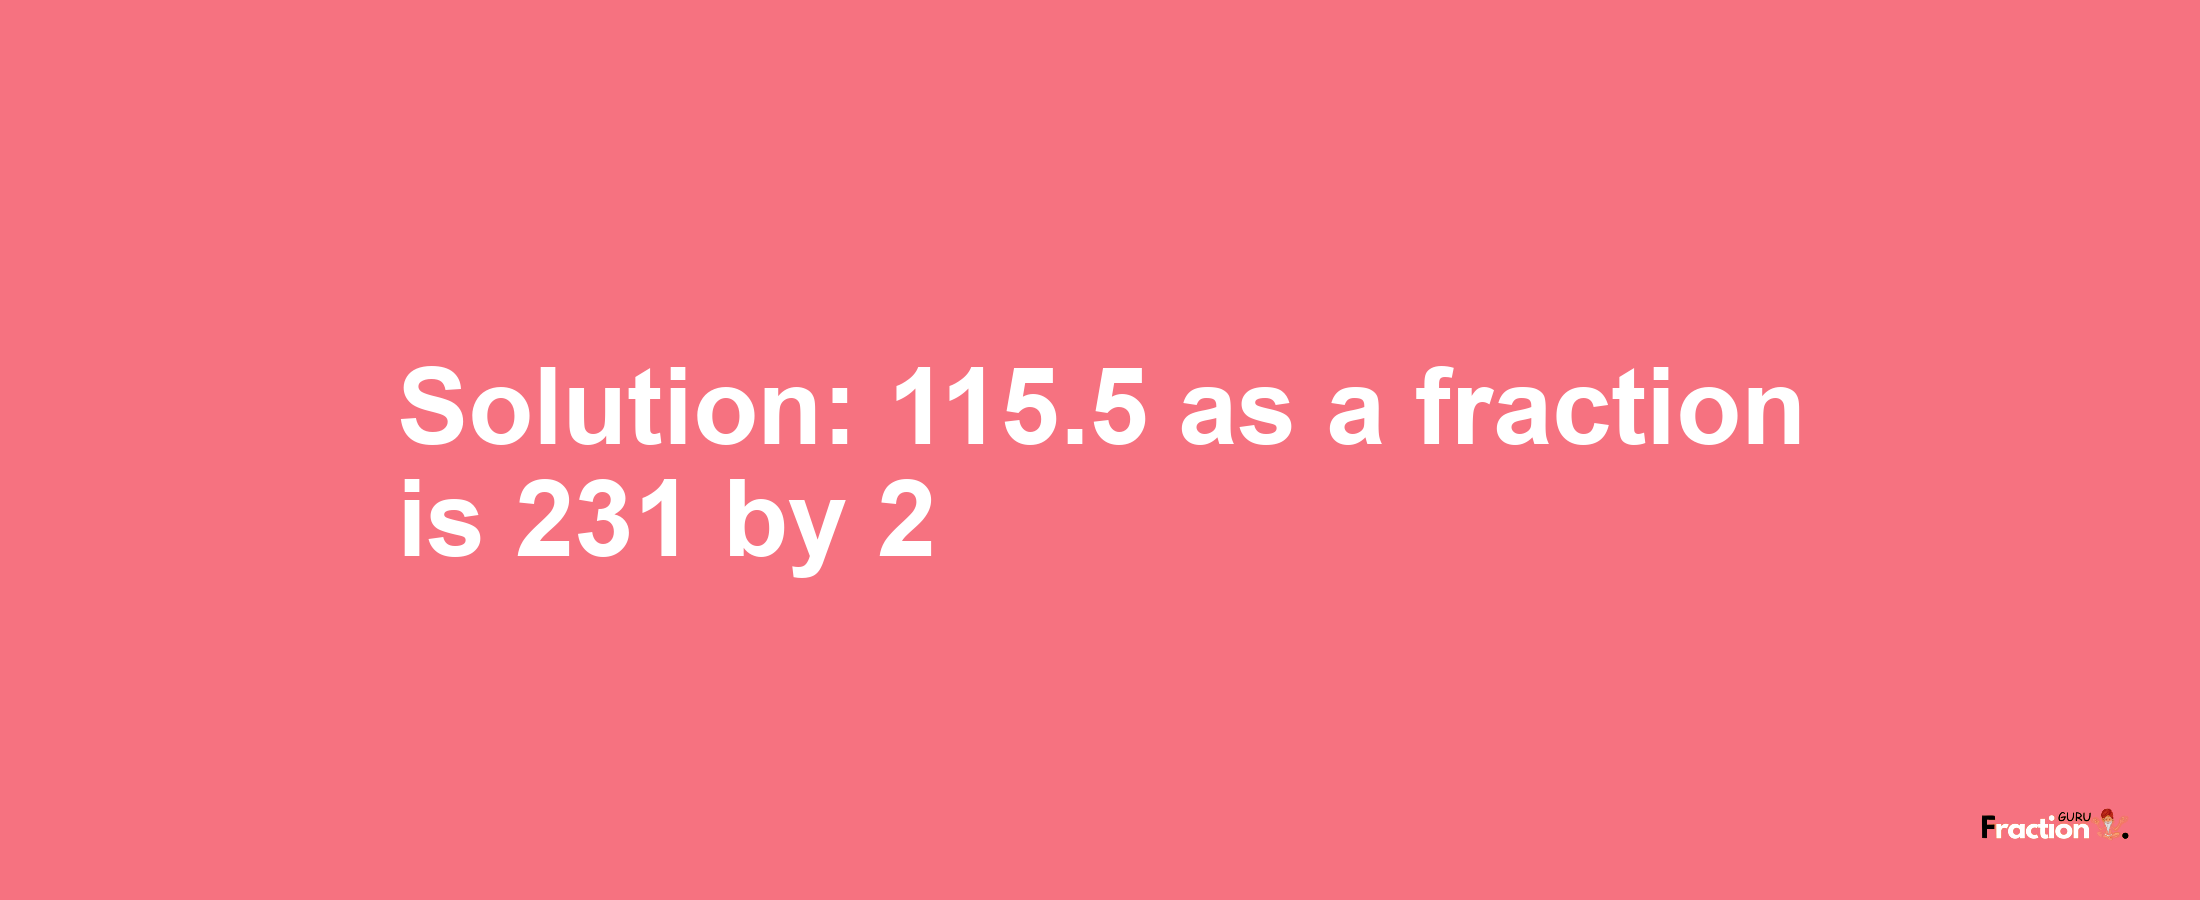 Solution:115.5 as a fraction is 231/2